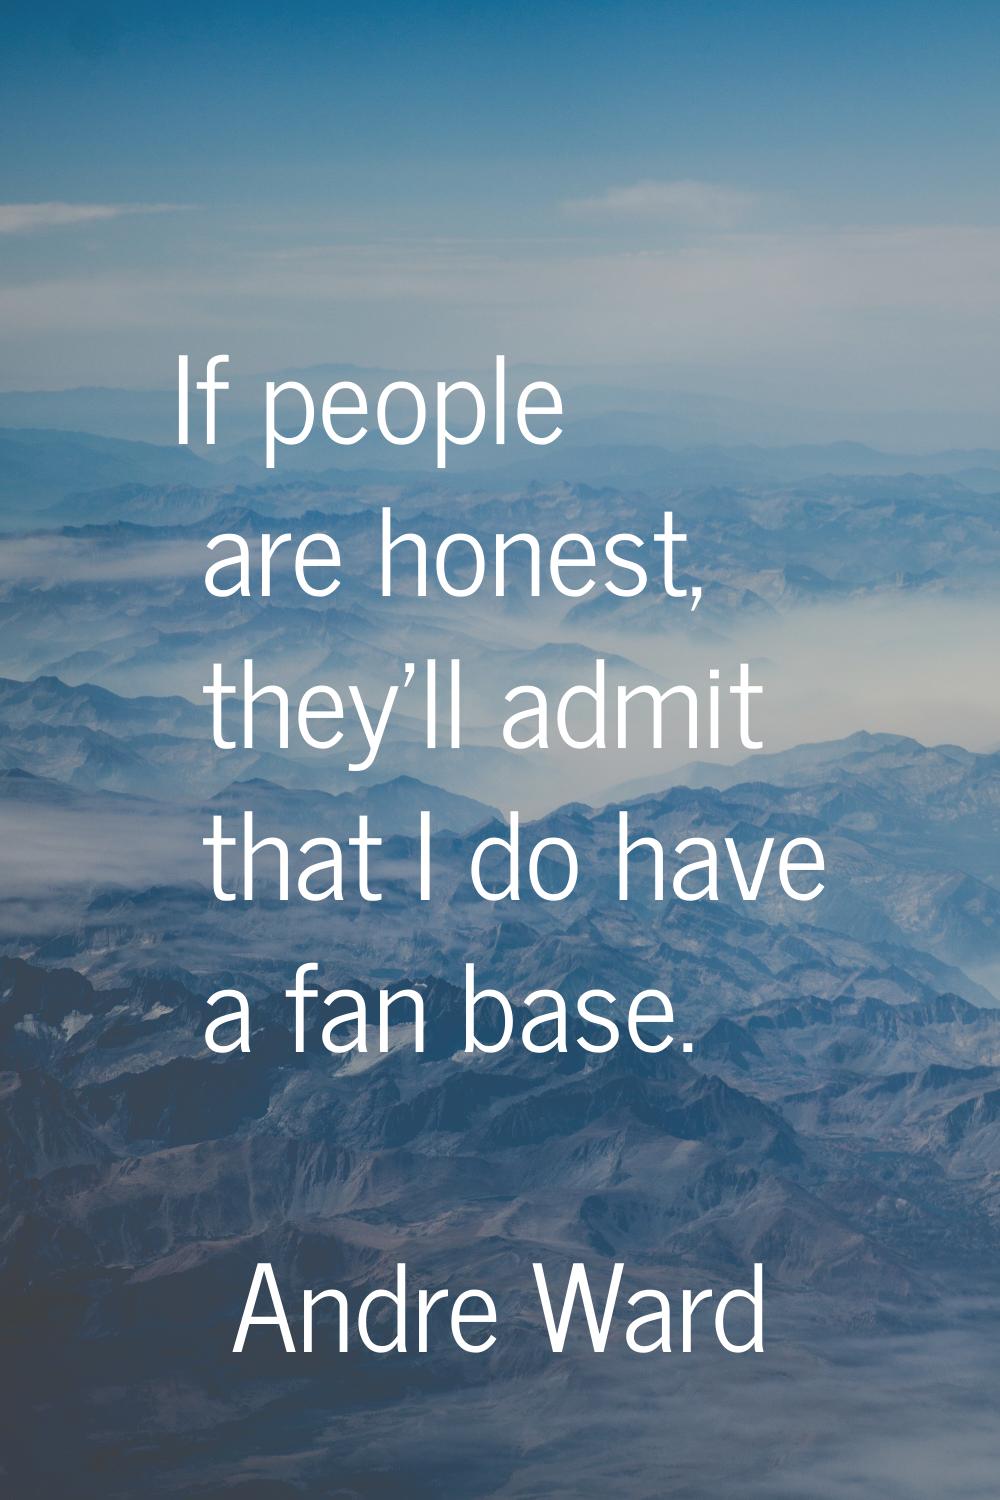 If people are honest, they'll admit that I do have a fan base.